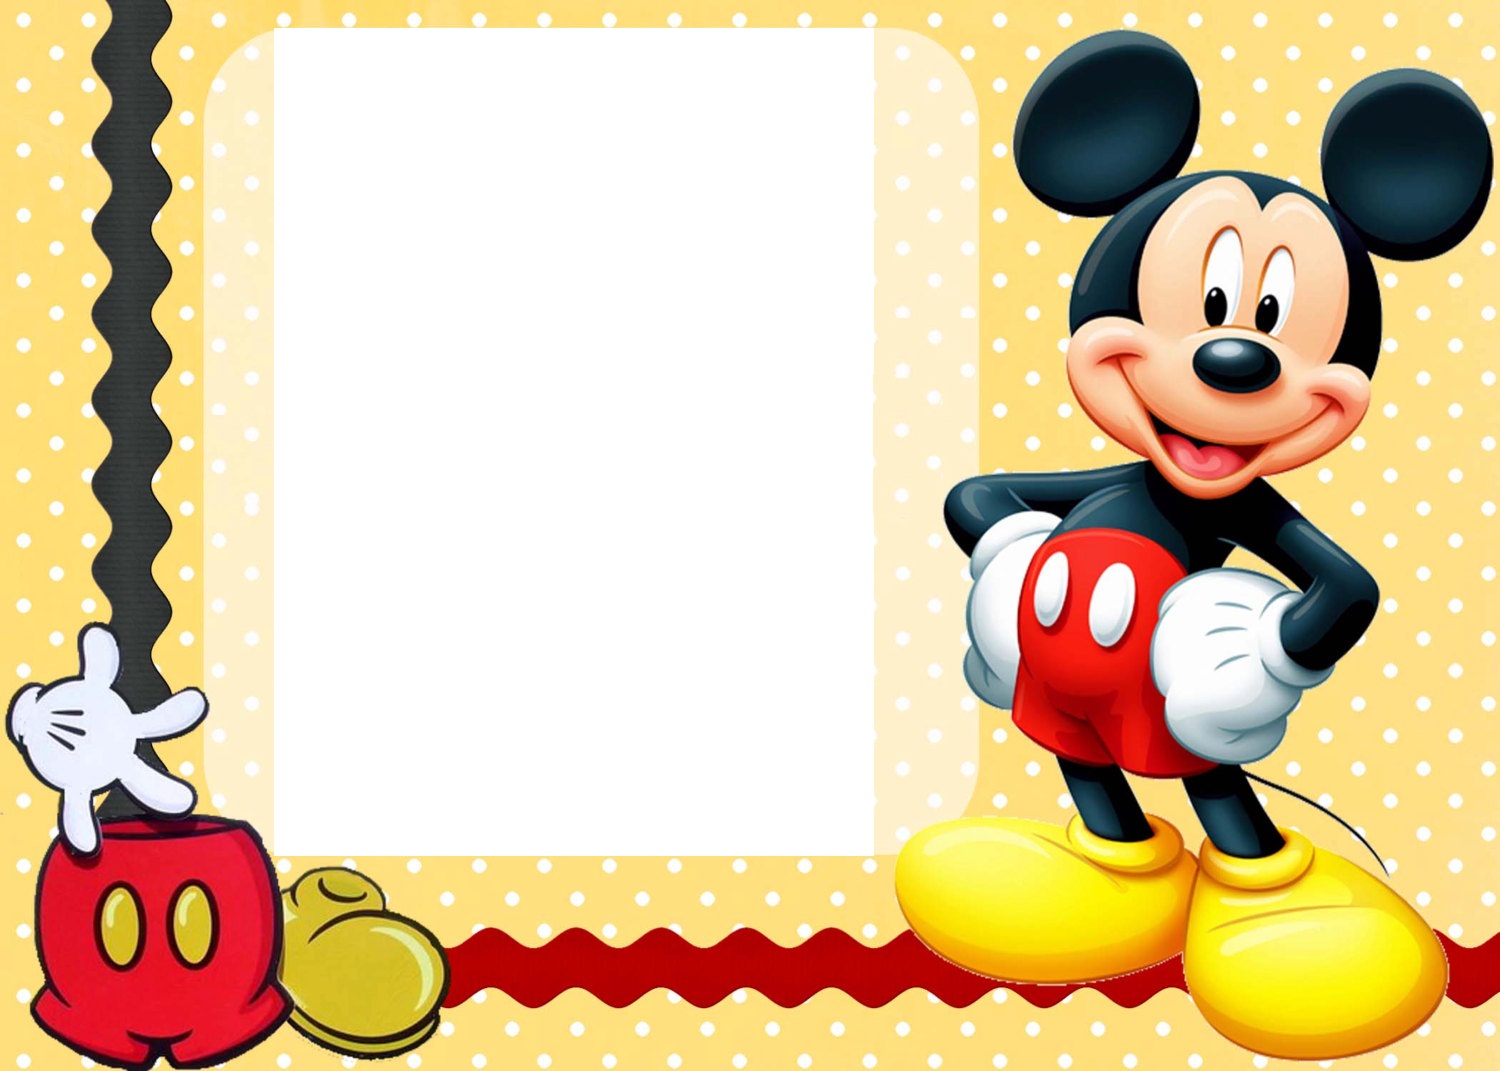 Mickey Mouse birthday card backgrounds